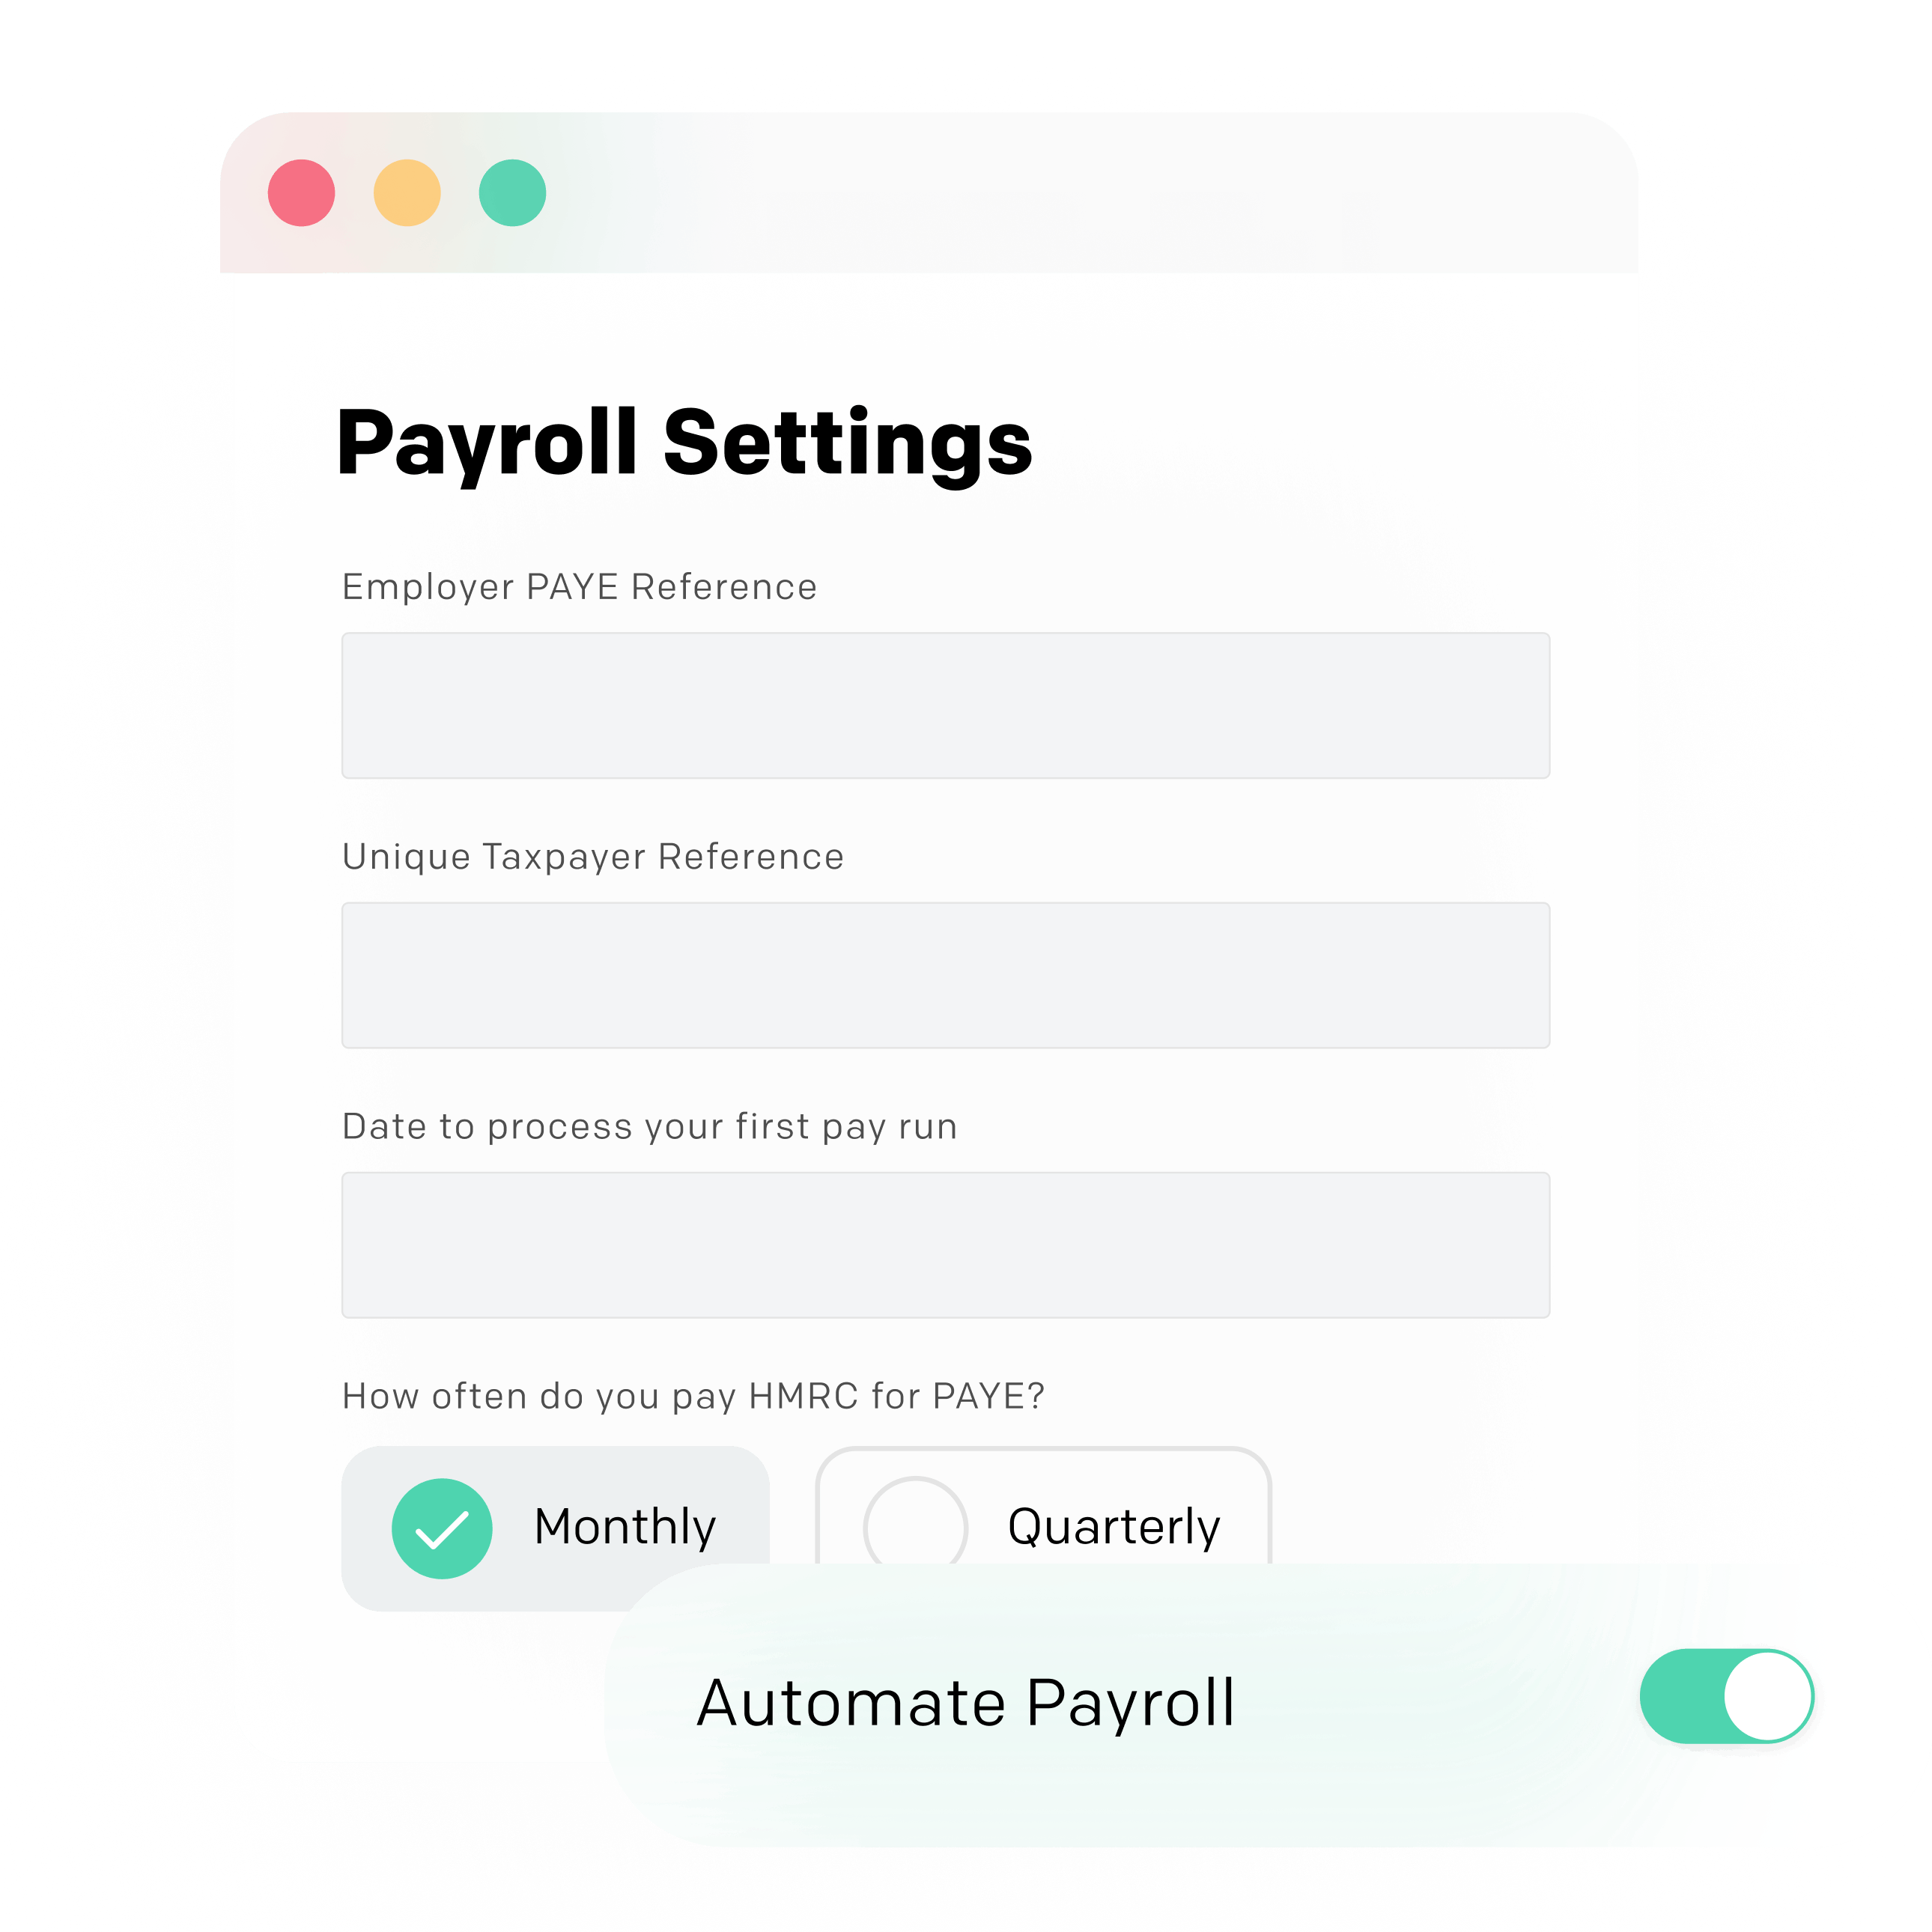 Automate your payroll filing